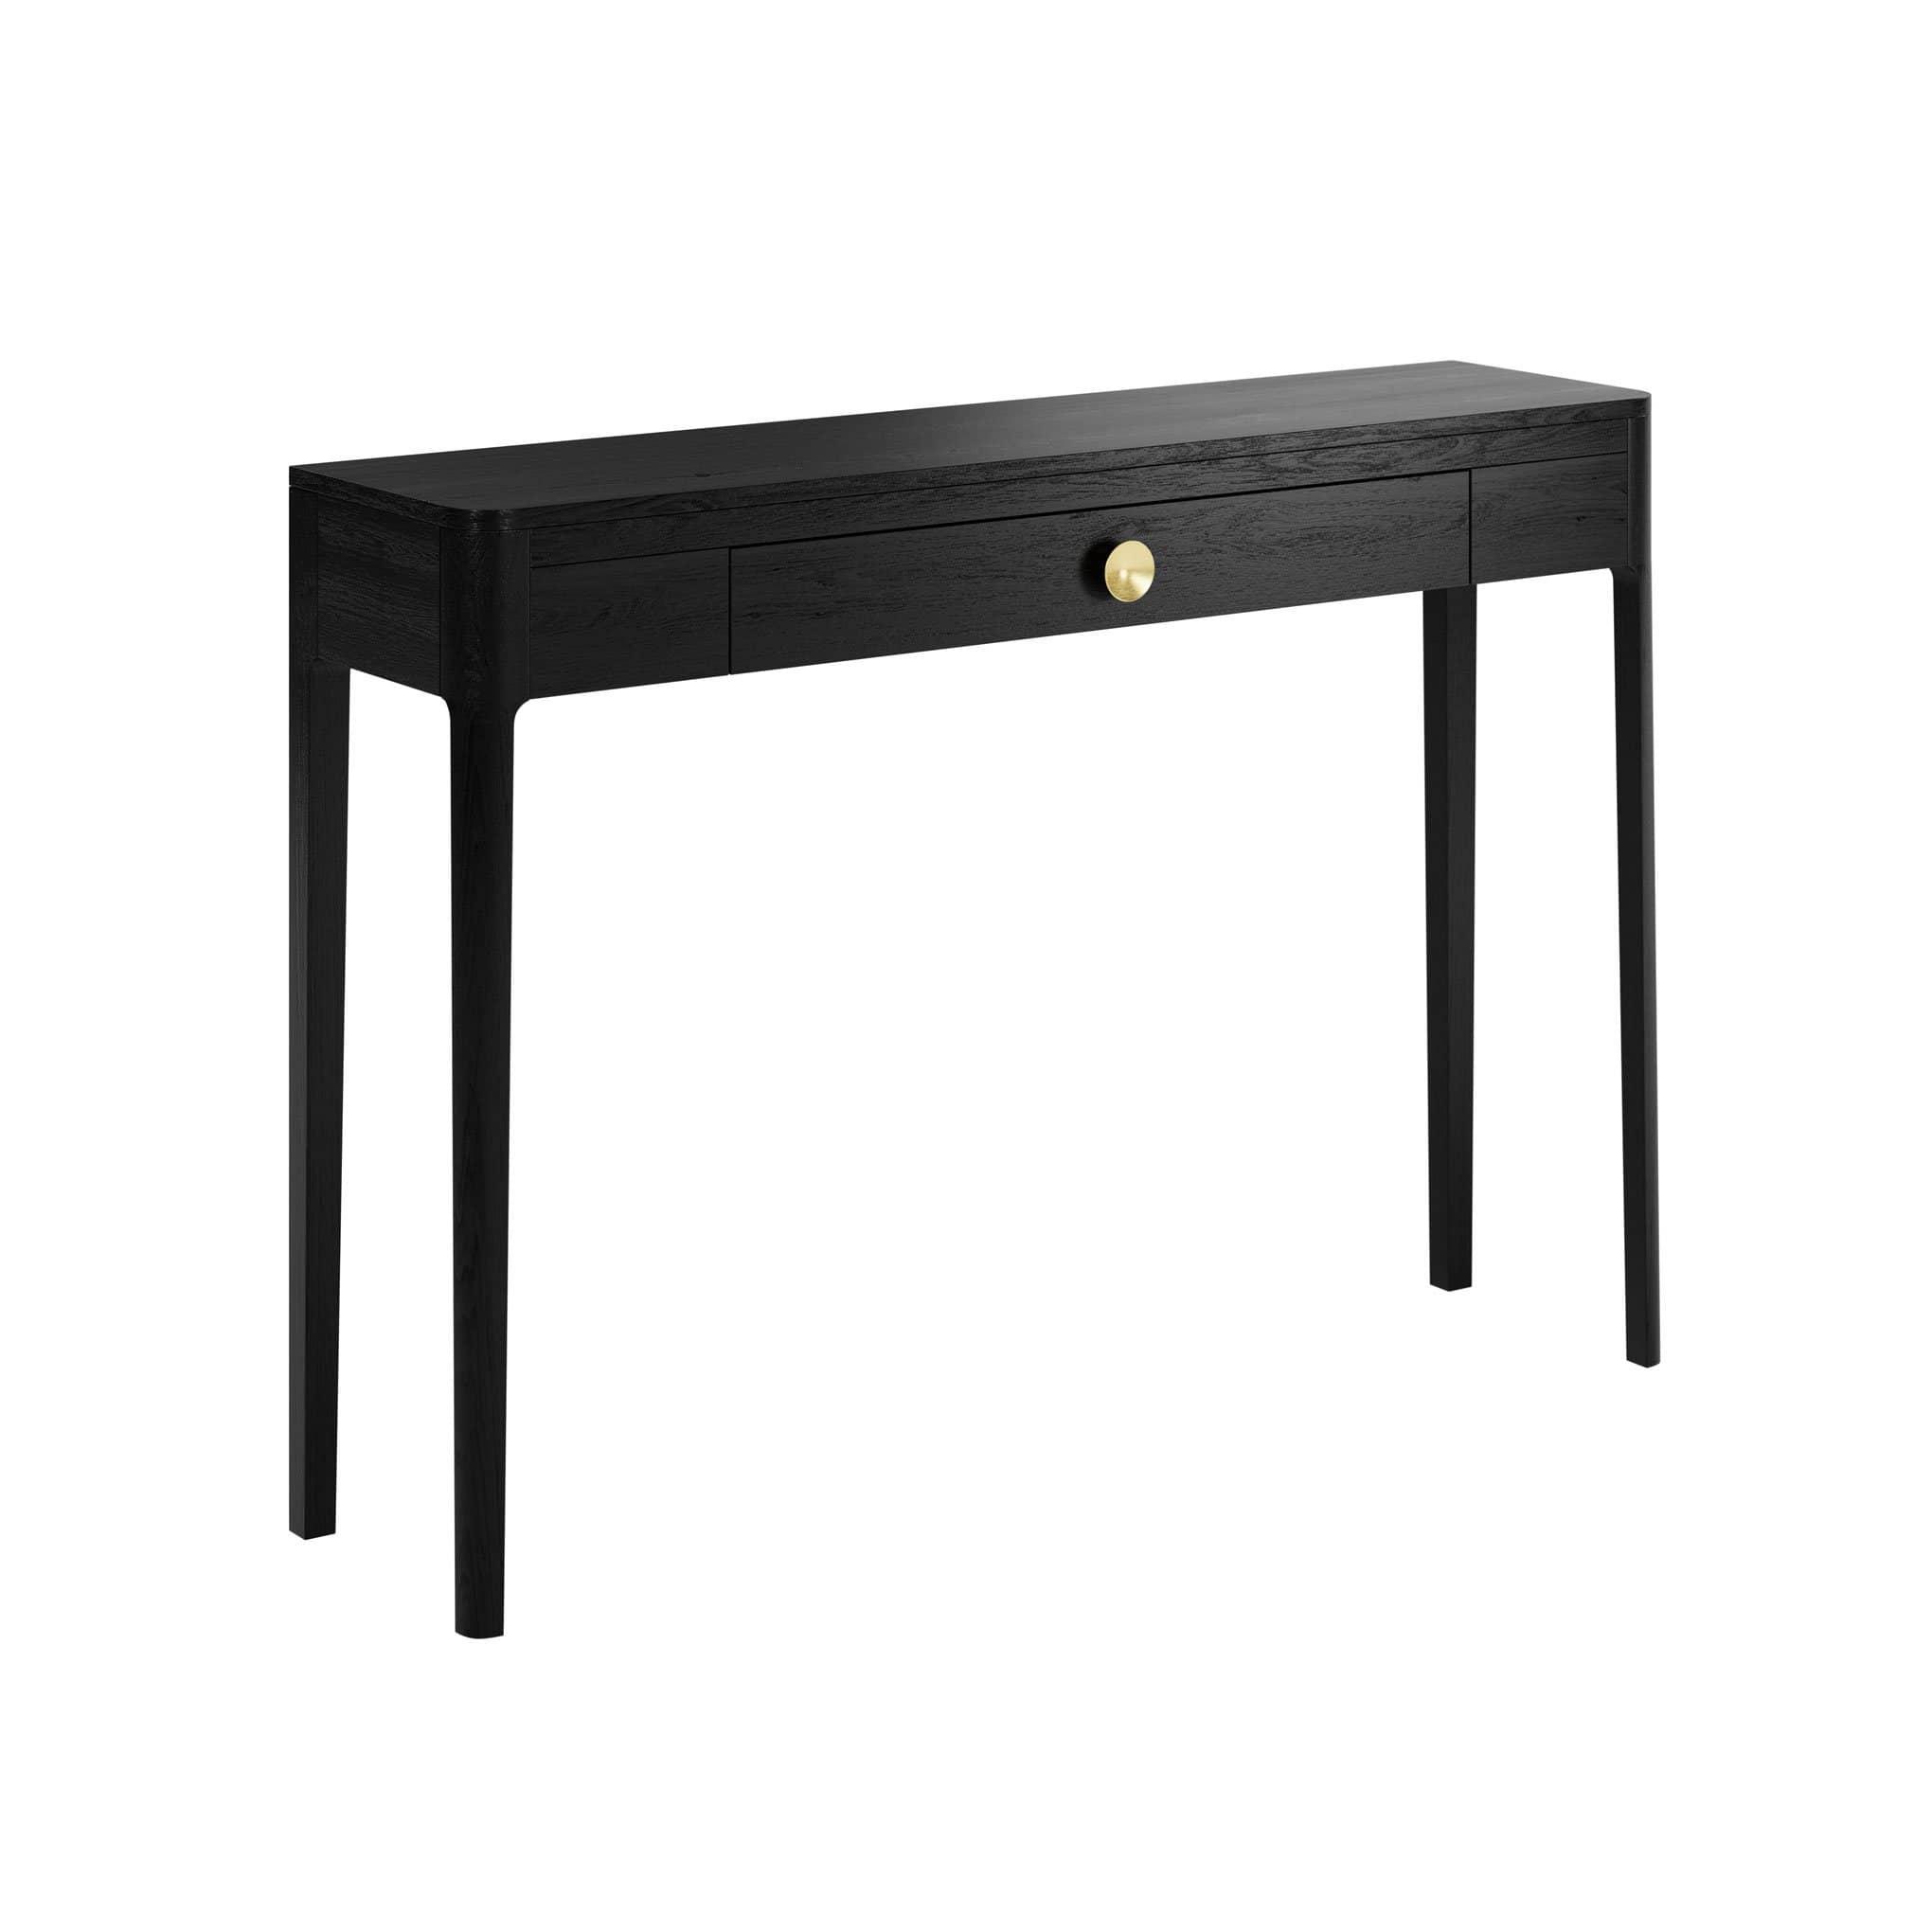 Abberley Console Table - Black by DI Designs - Maison Rêves UK